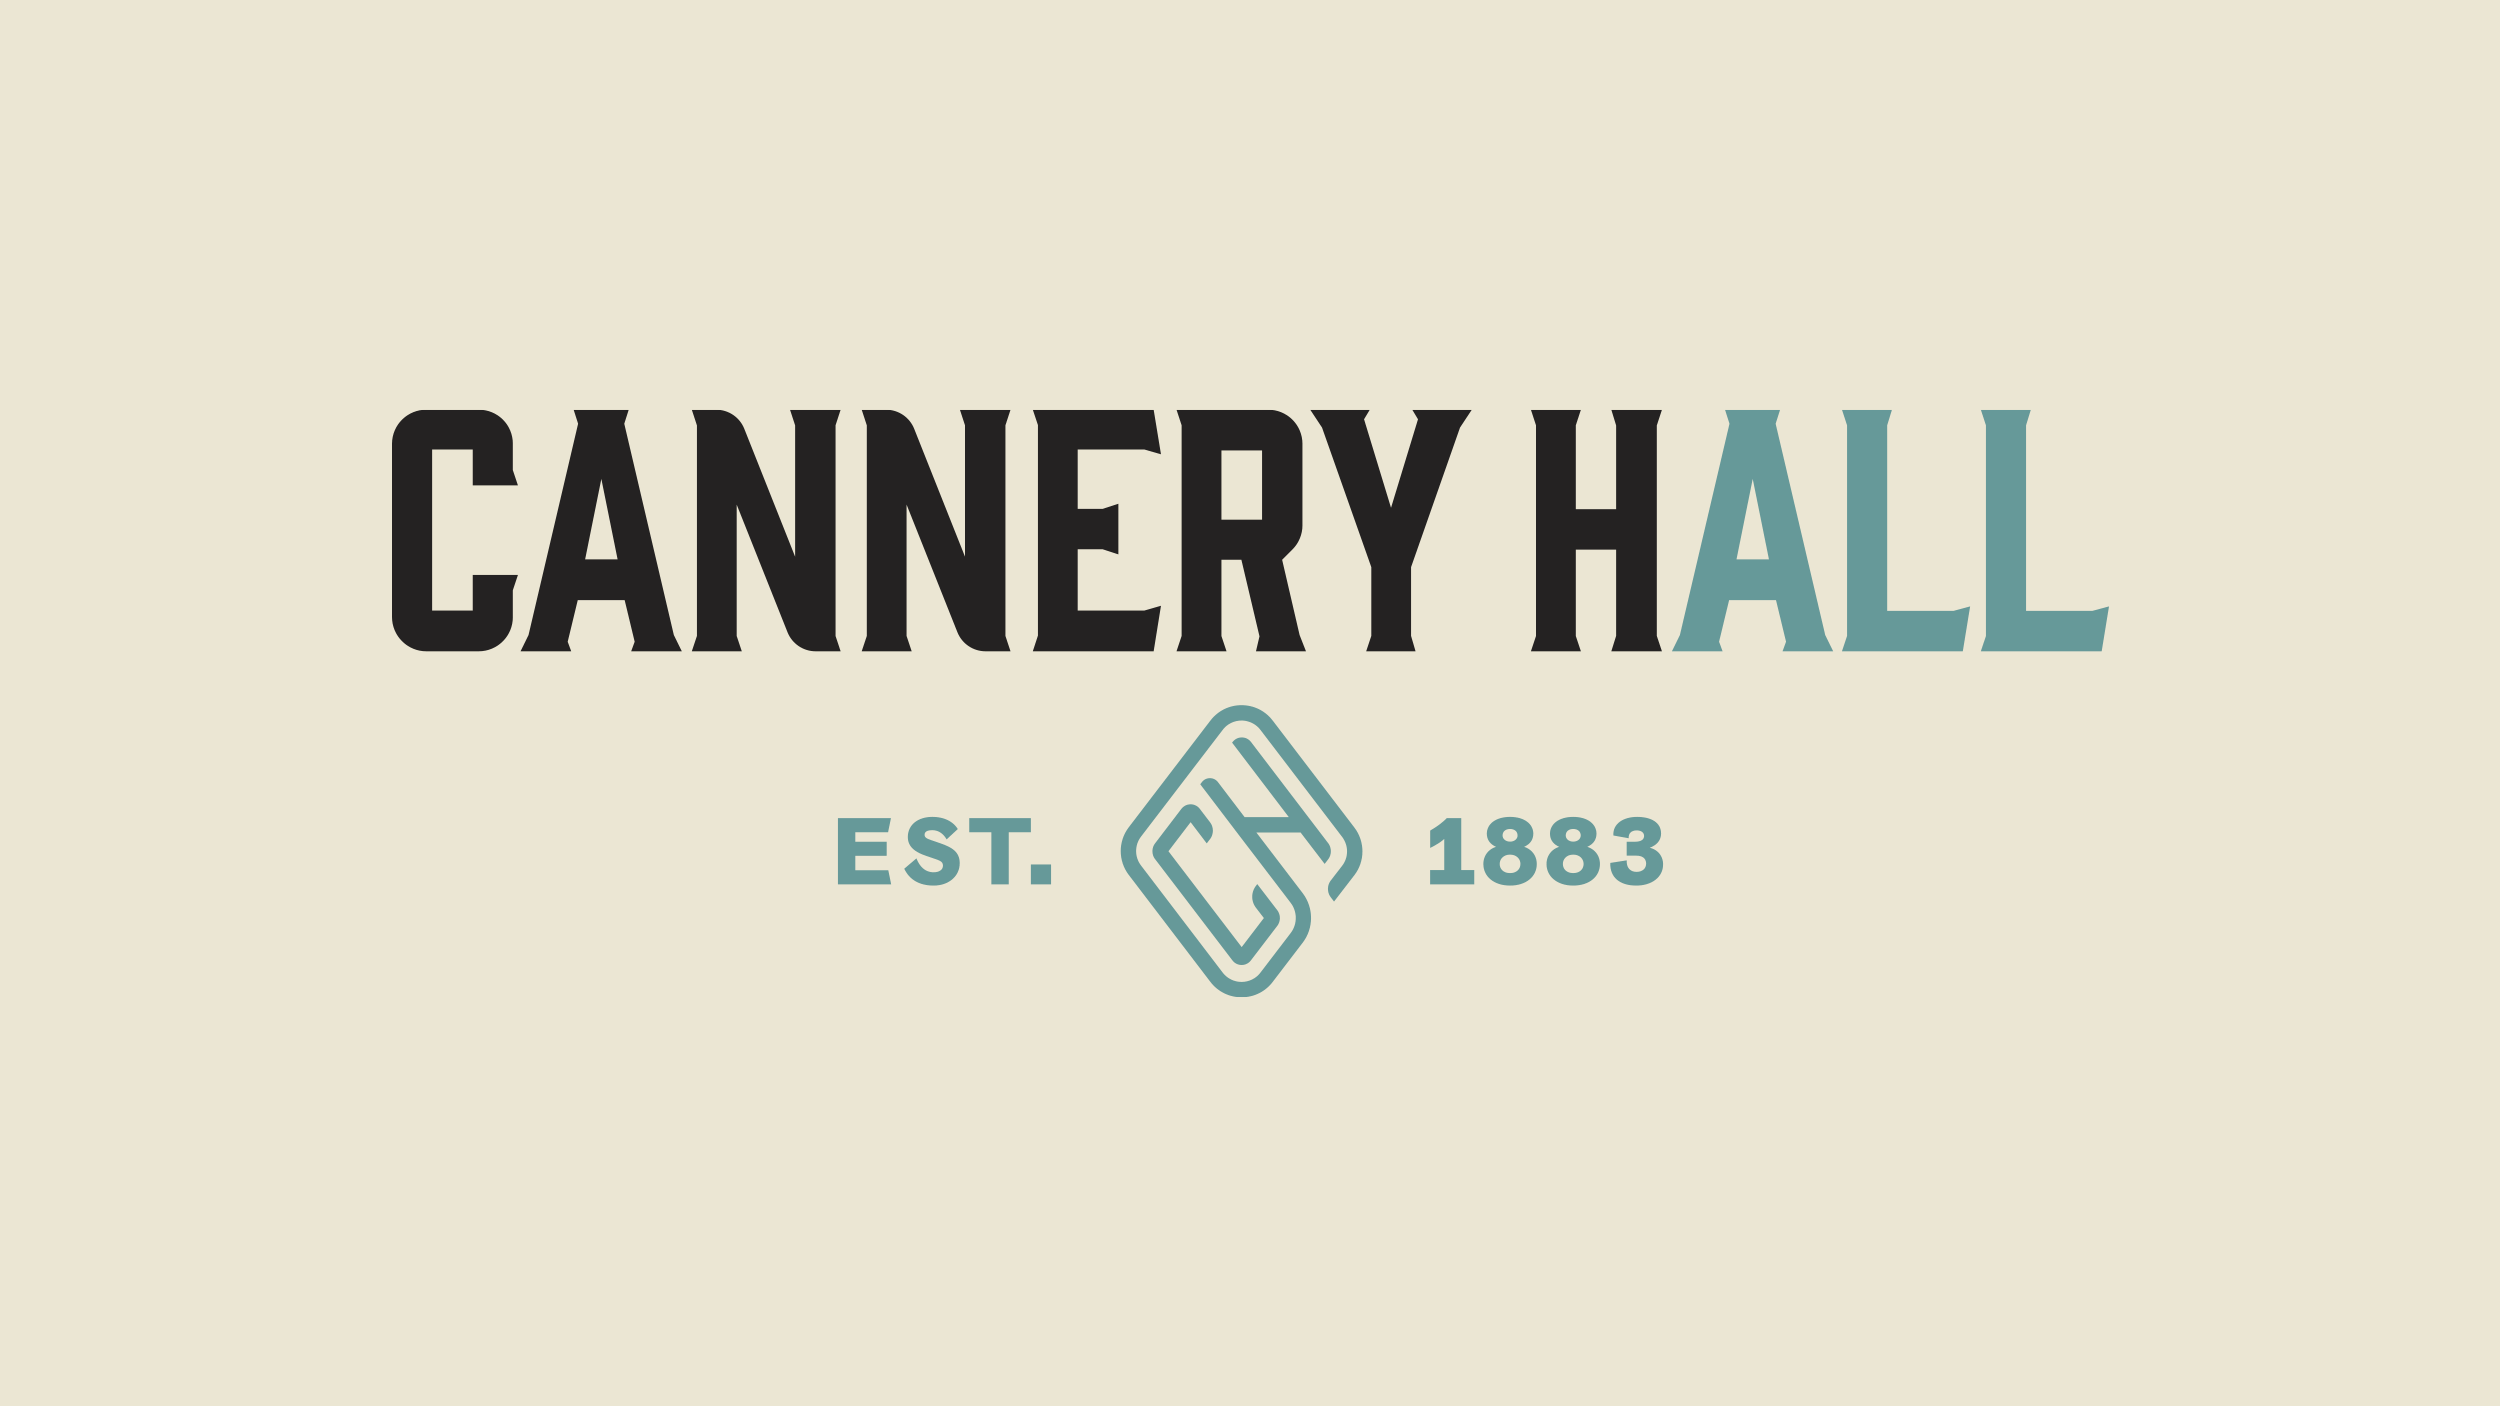 Cannery Hall identity design lockup with various color combinations for entertainment venue brand